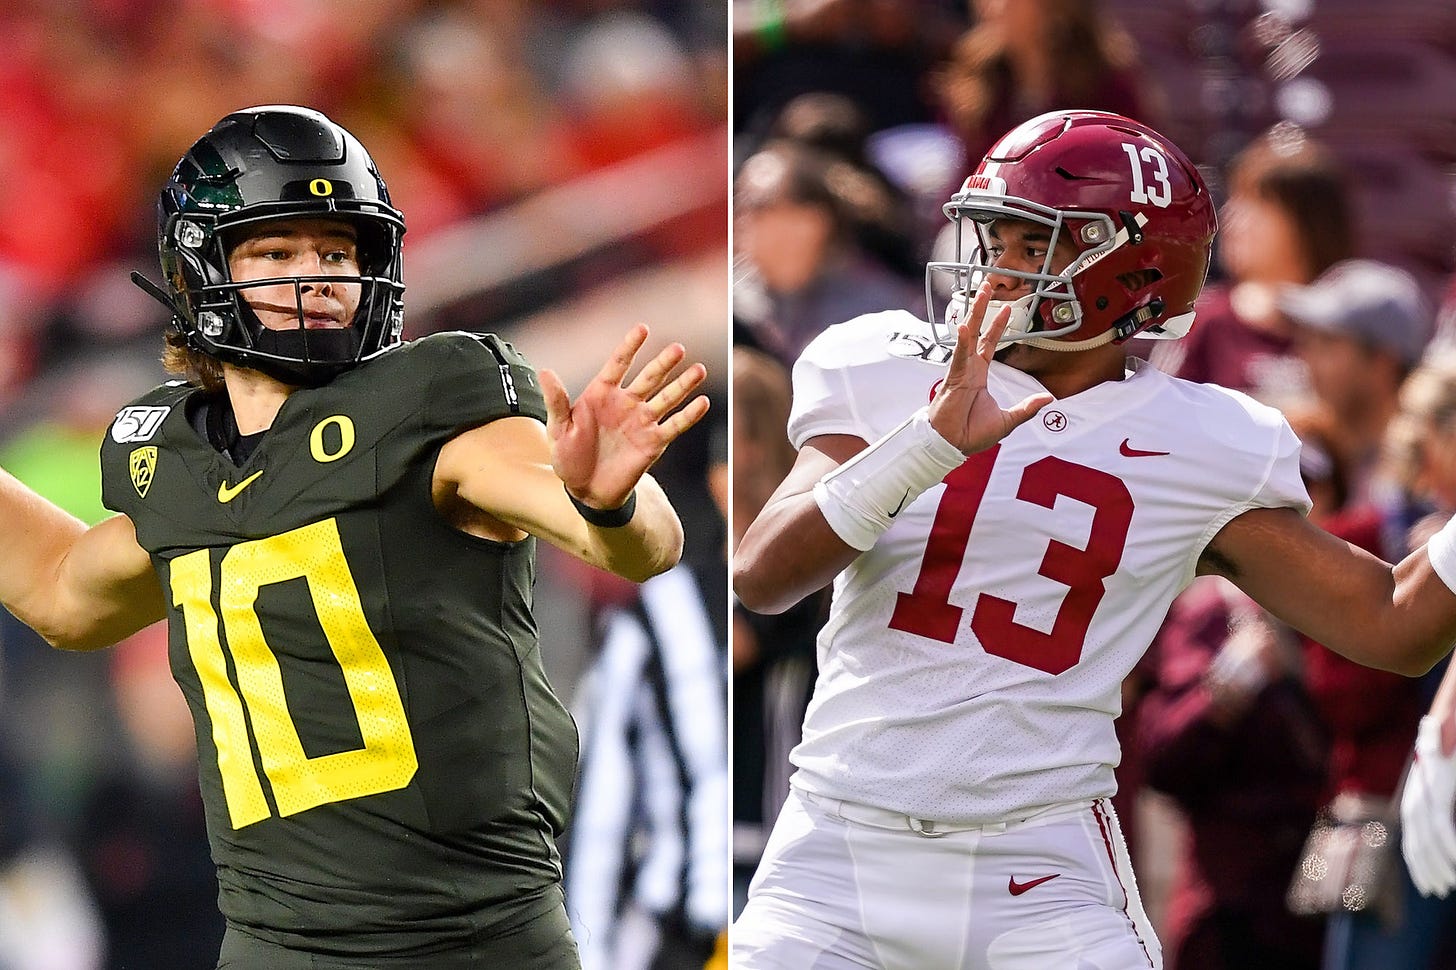 NFL draft: Justin Herbert could be drafted ahead of Tua Tagovailoa